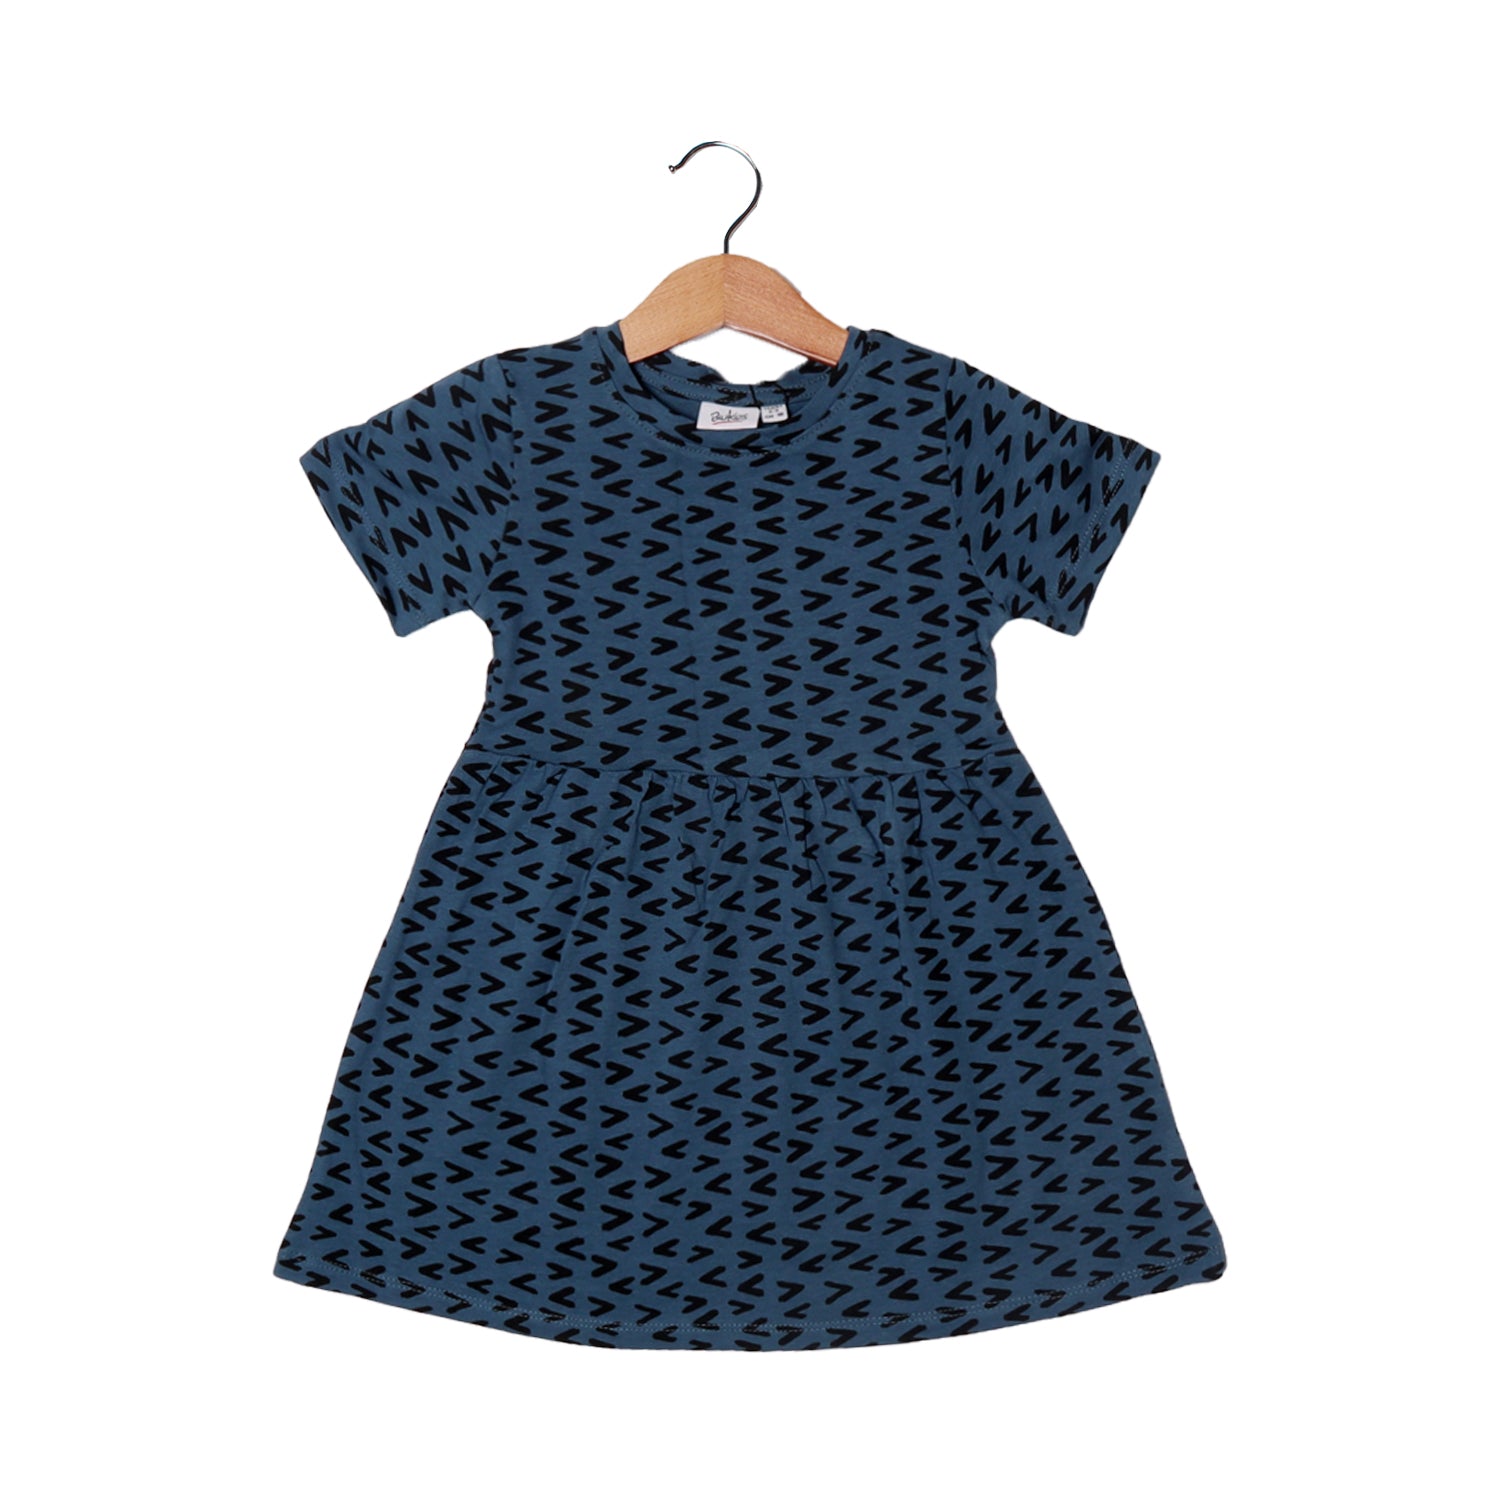 TEAL BLUE PATTERN PRINTED FROCK FOR GIRLS